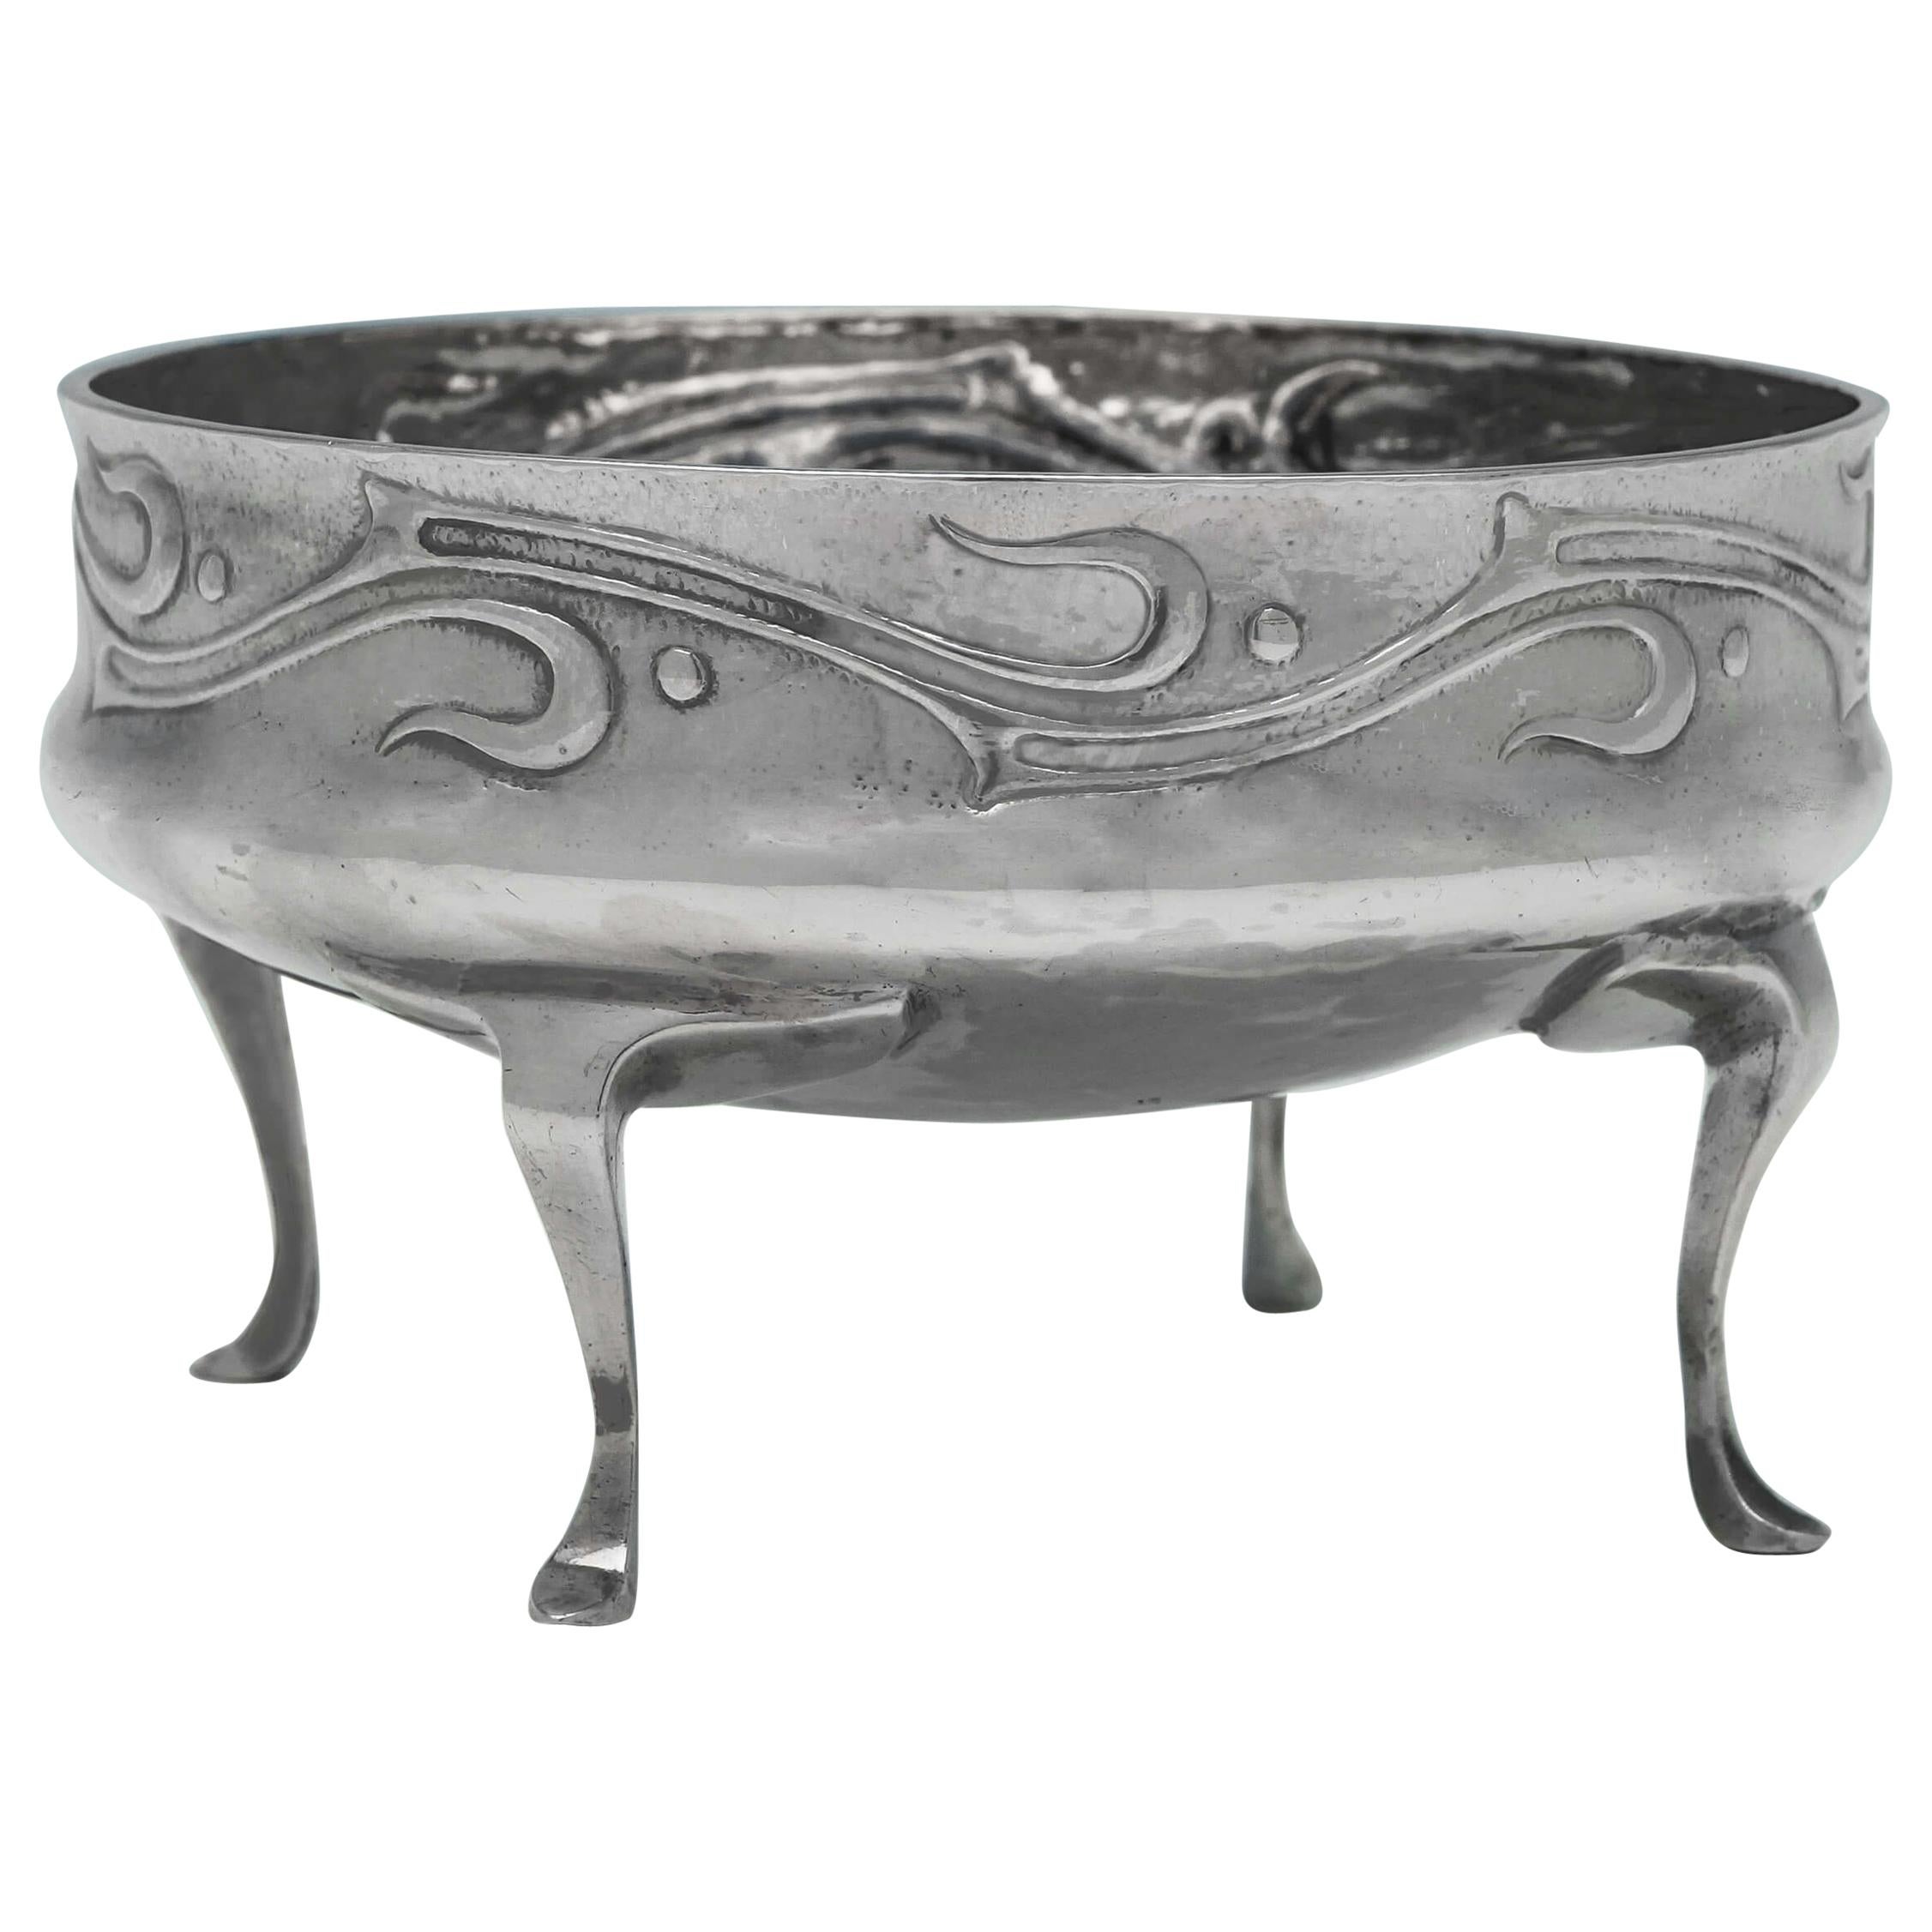 Archibald Knox Design for Liberty & Co - Sterling Silver Cymric Bowl - 1900